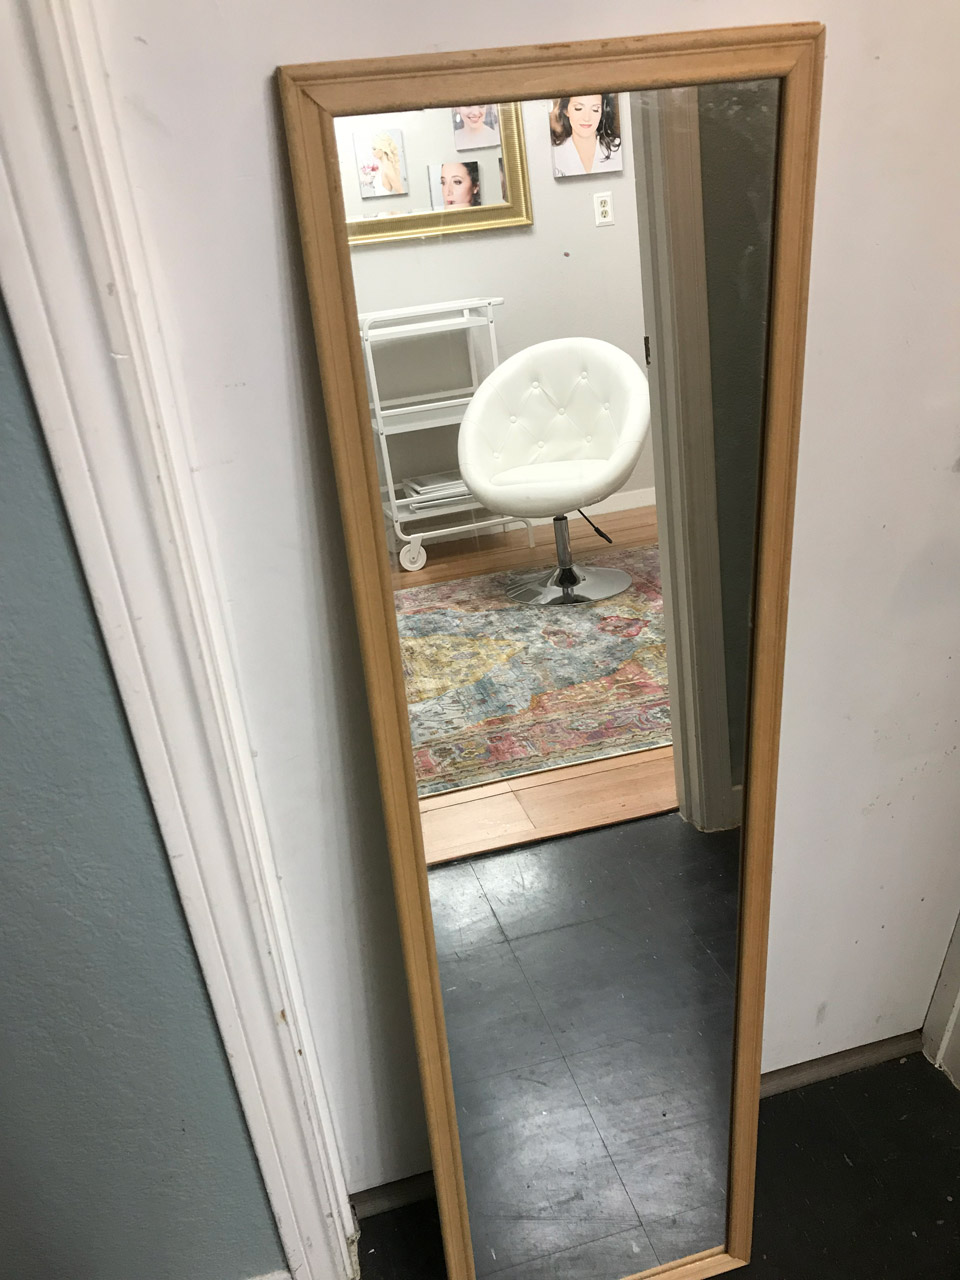 Mirrors for hair and makeup. $10.00